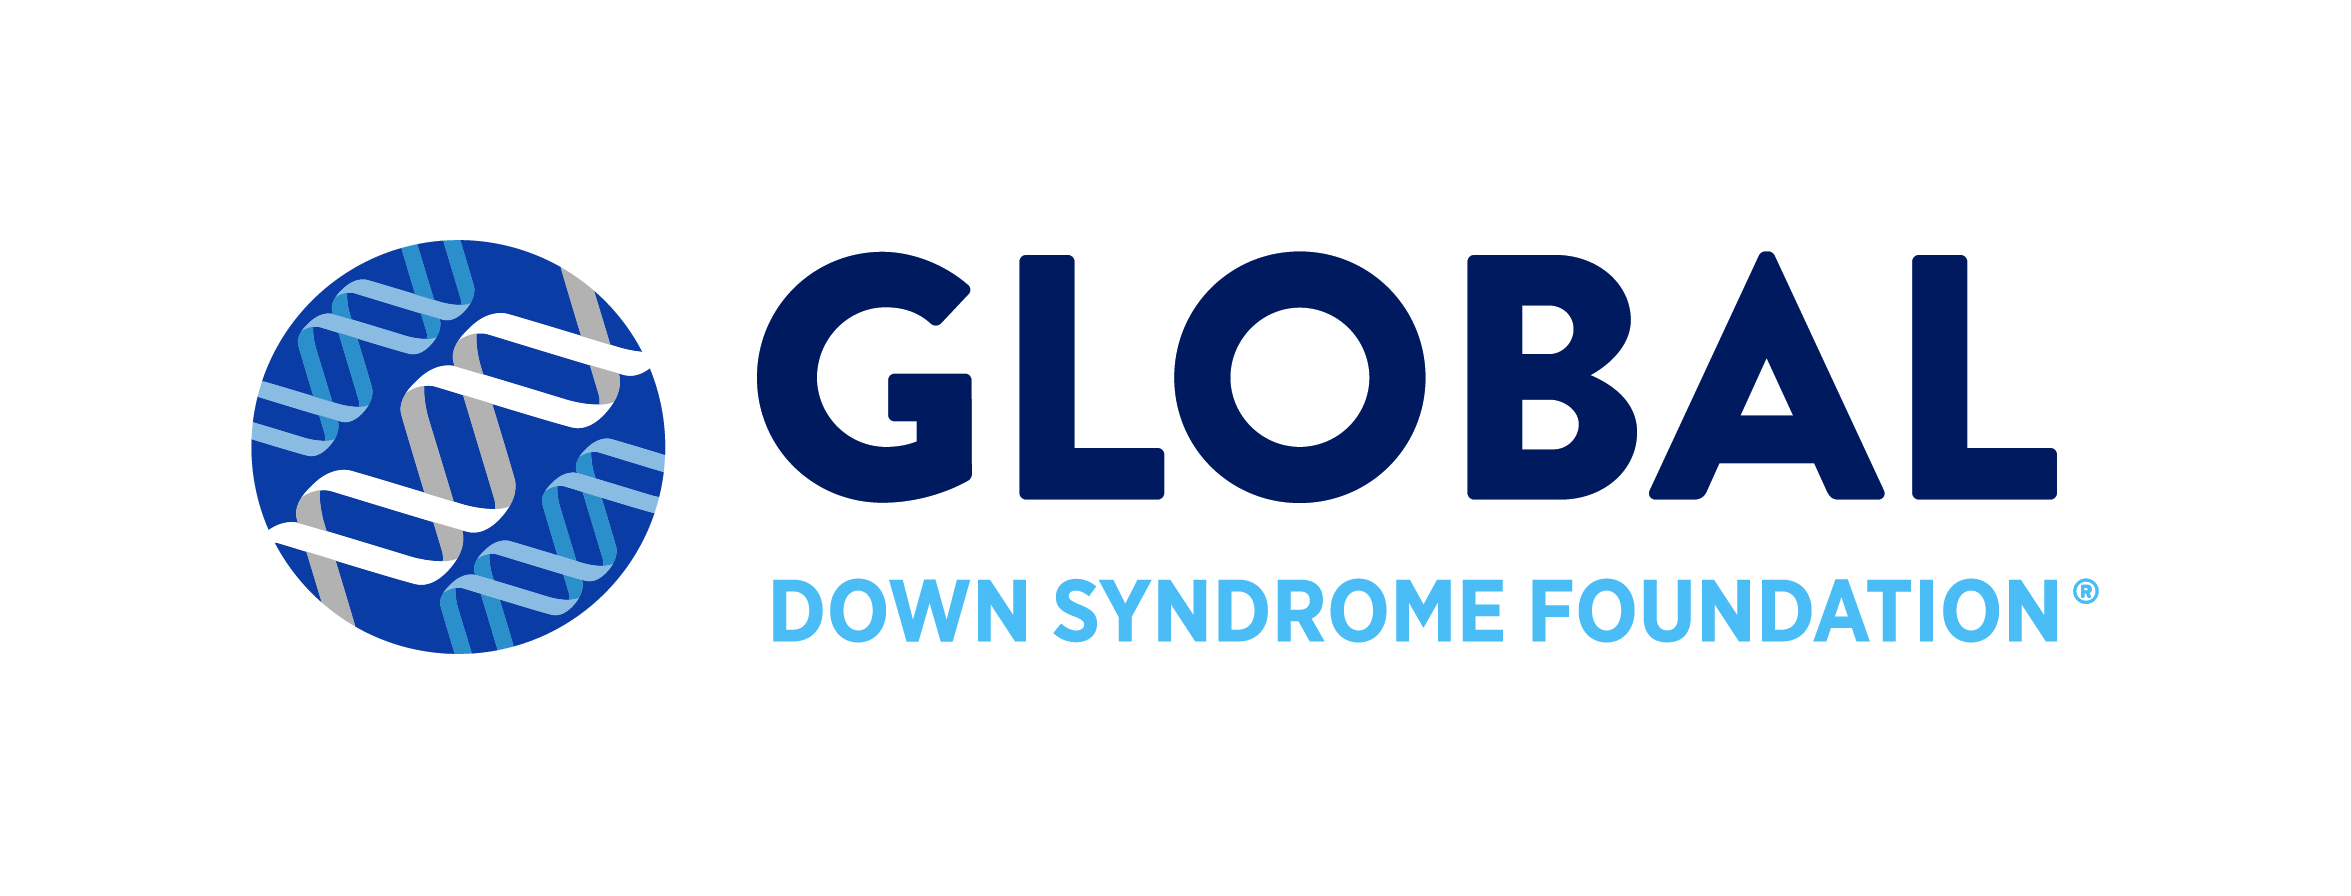 Global Down Syndrome Foundation Launches Matching “21 for